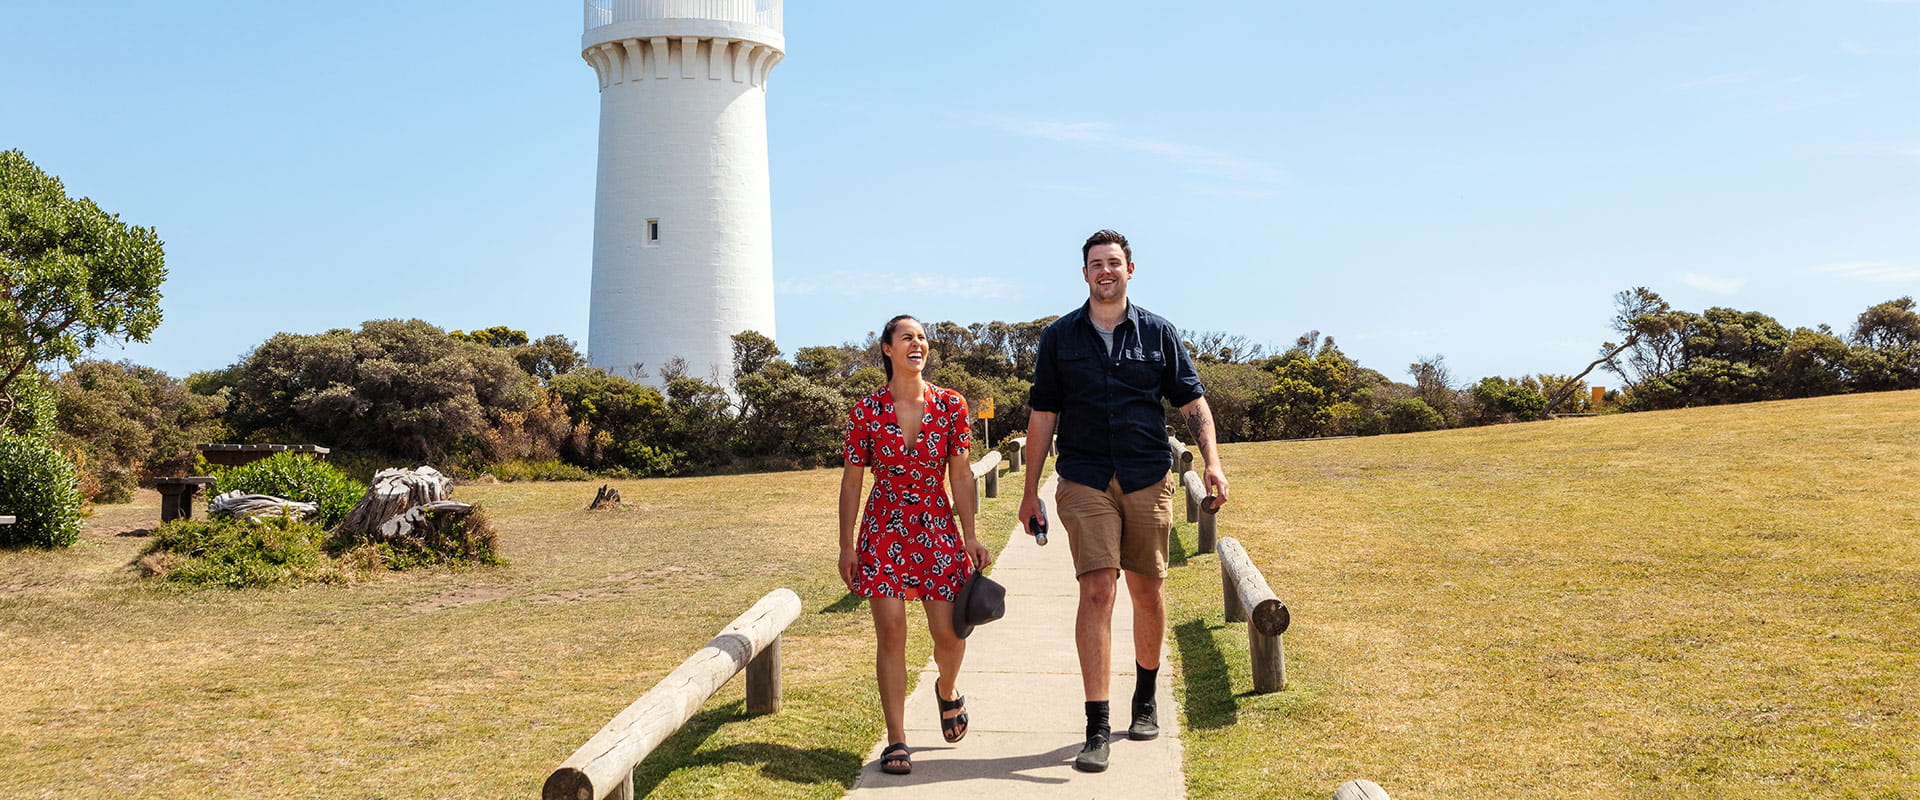 Two people walk away from a large white lighthouse with a red top surrounded by manicured grassland with picnic areas and coastal foliage.